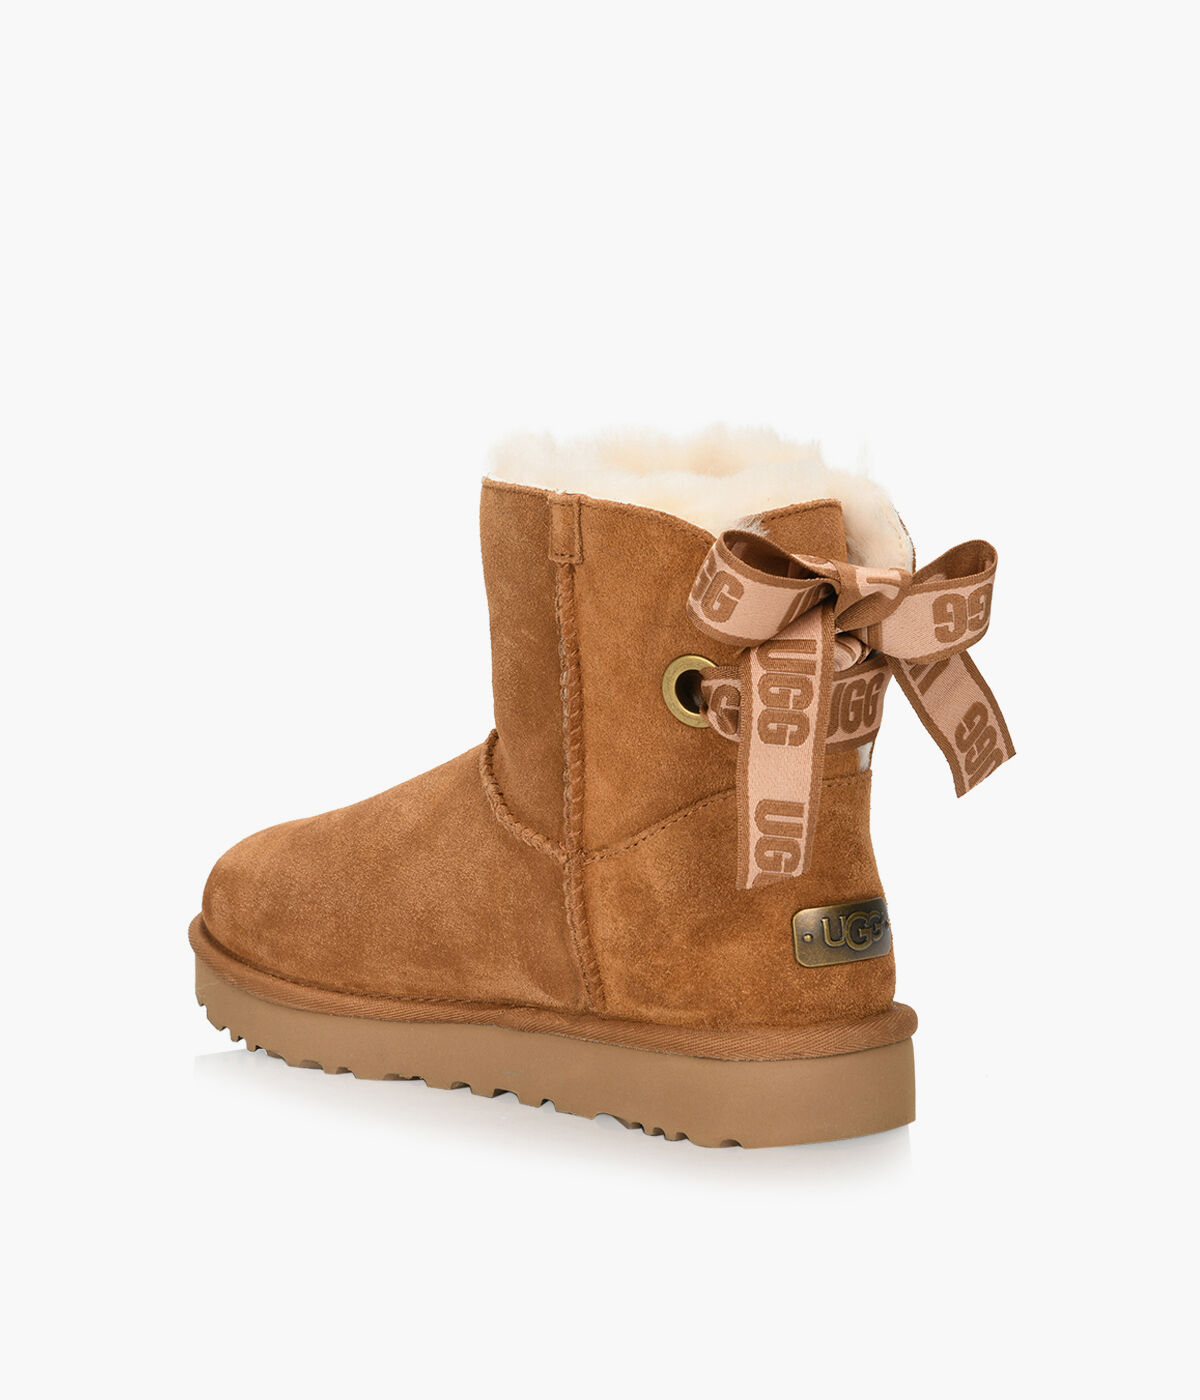 customizable bailey bow genuine shearling bootie